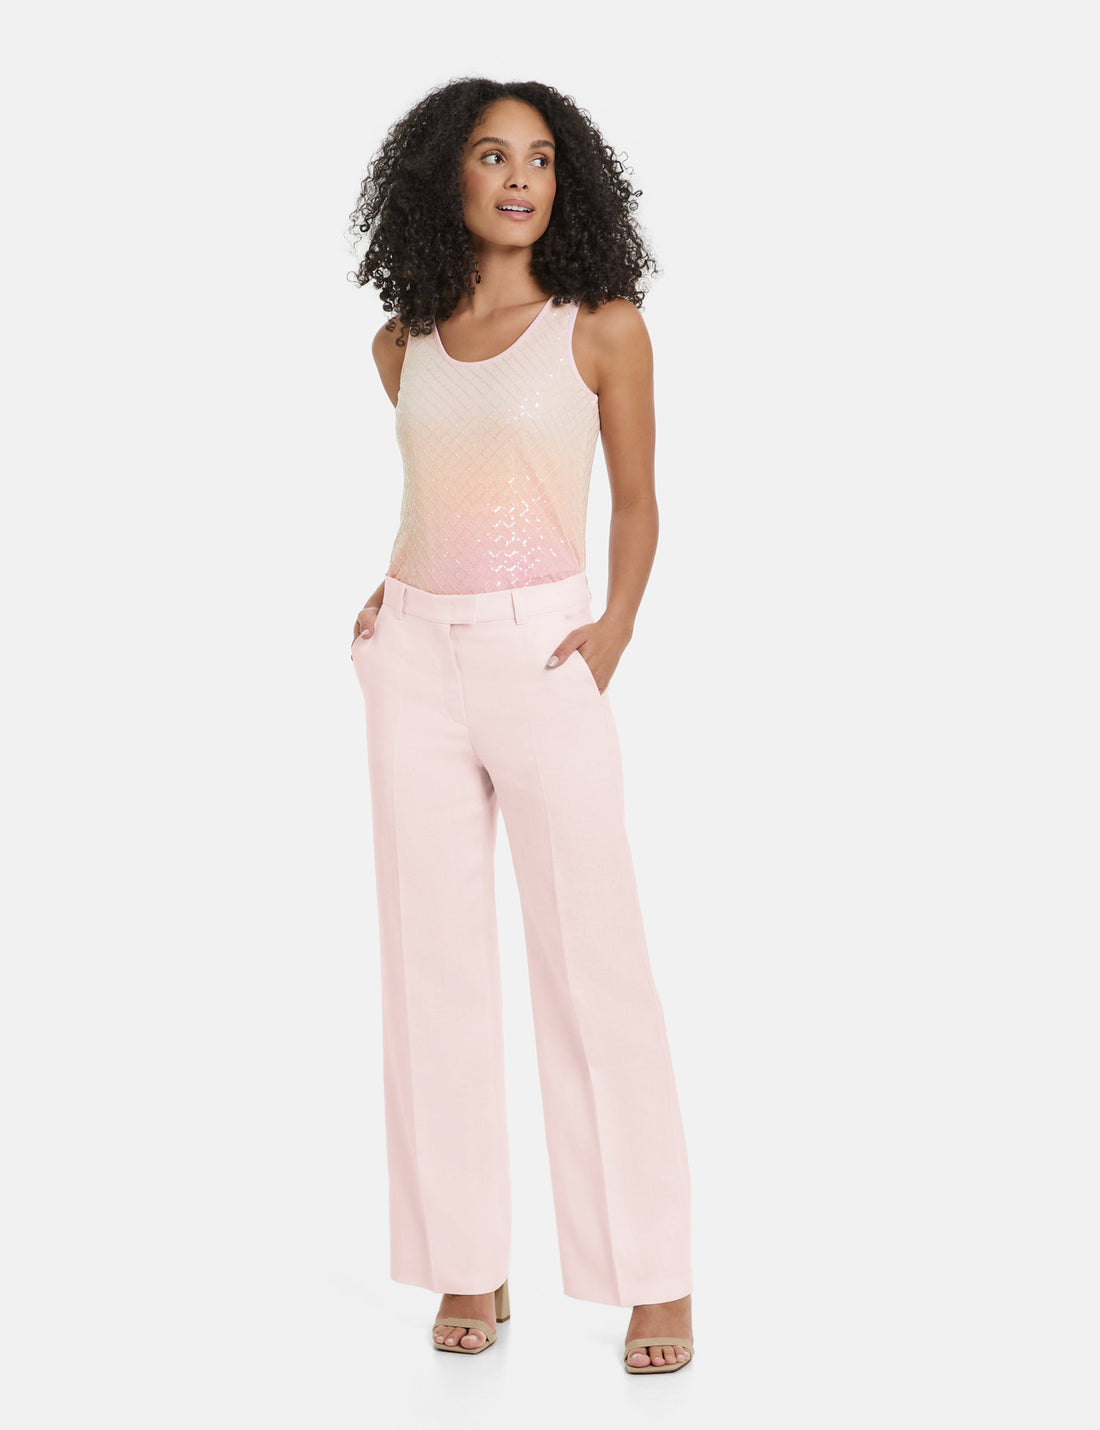 Linen Trousers With Pressed Pleats_320020-31277_30915_01